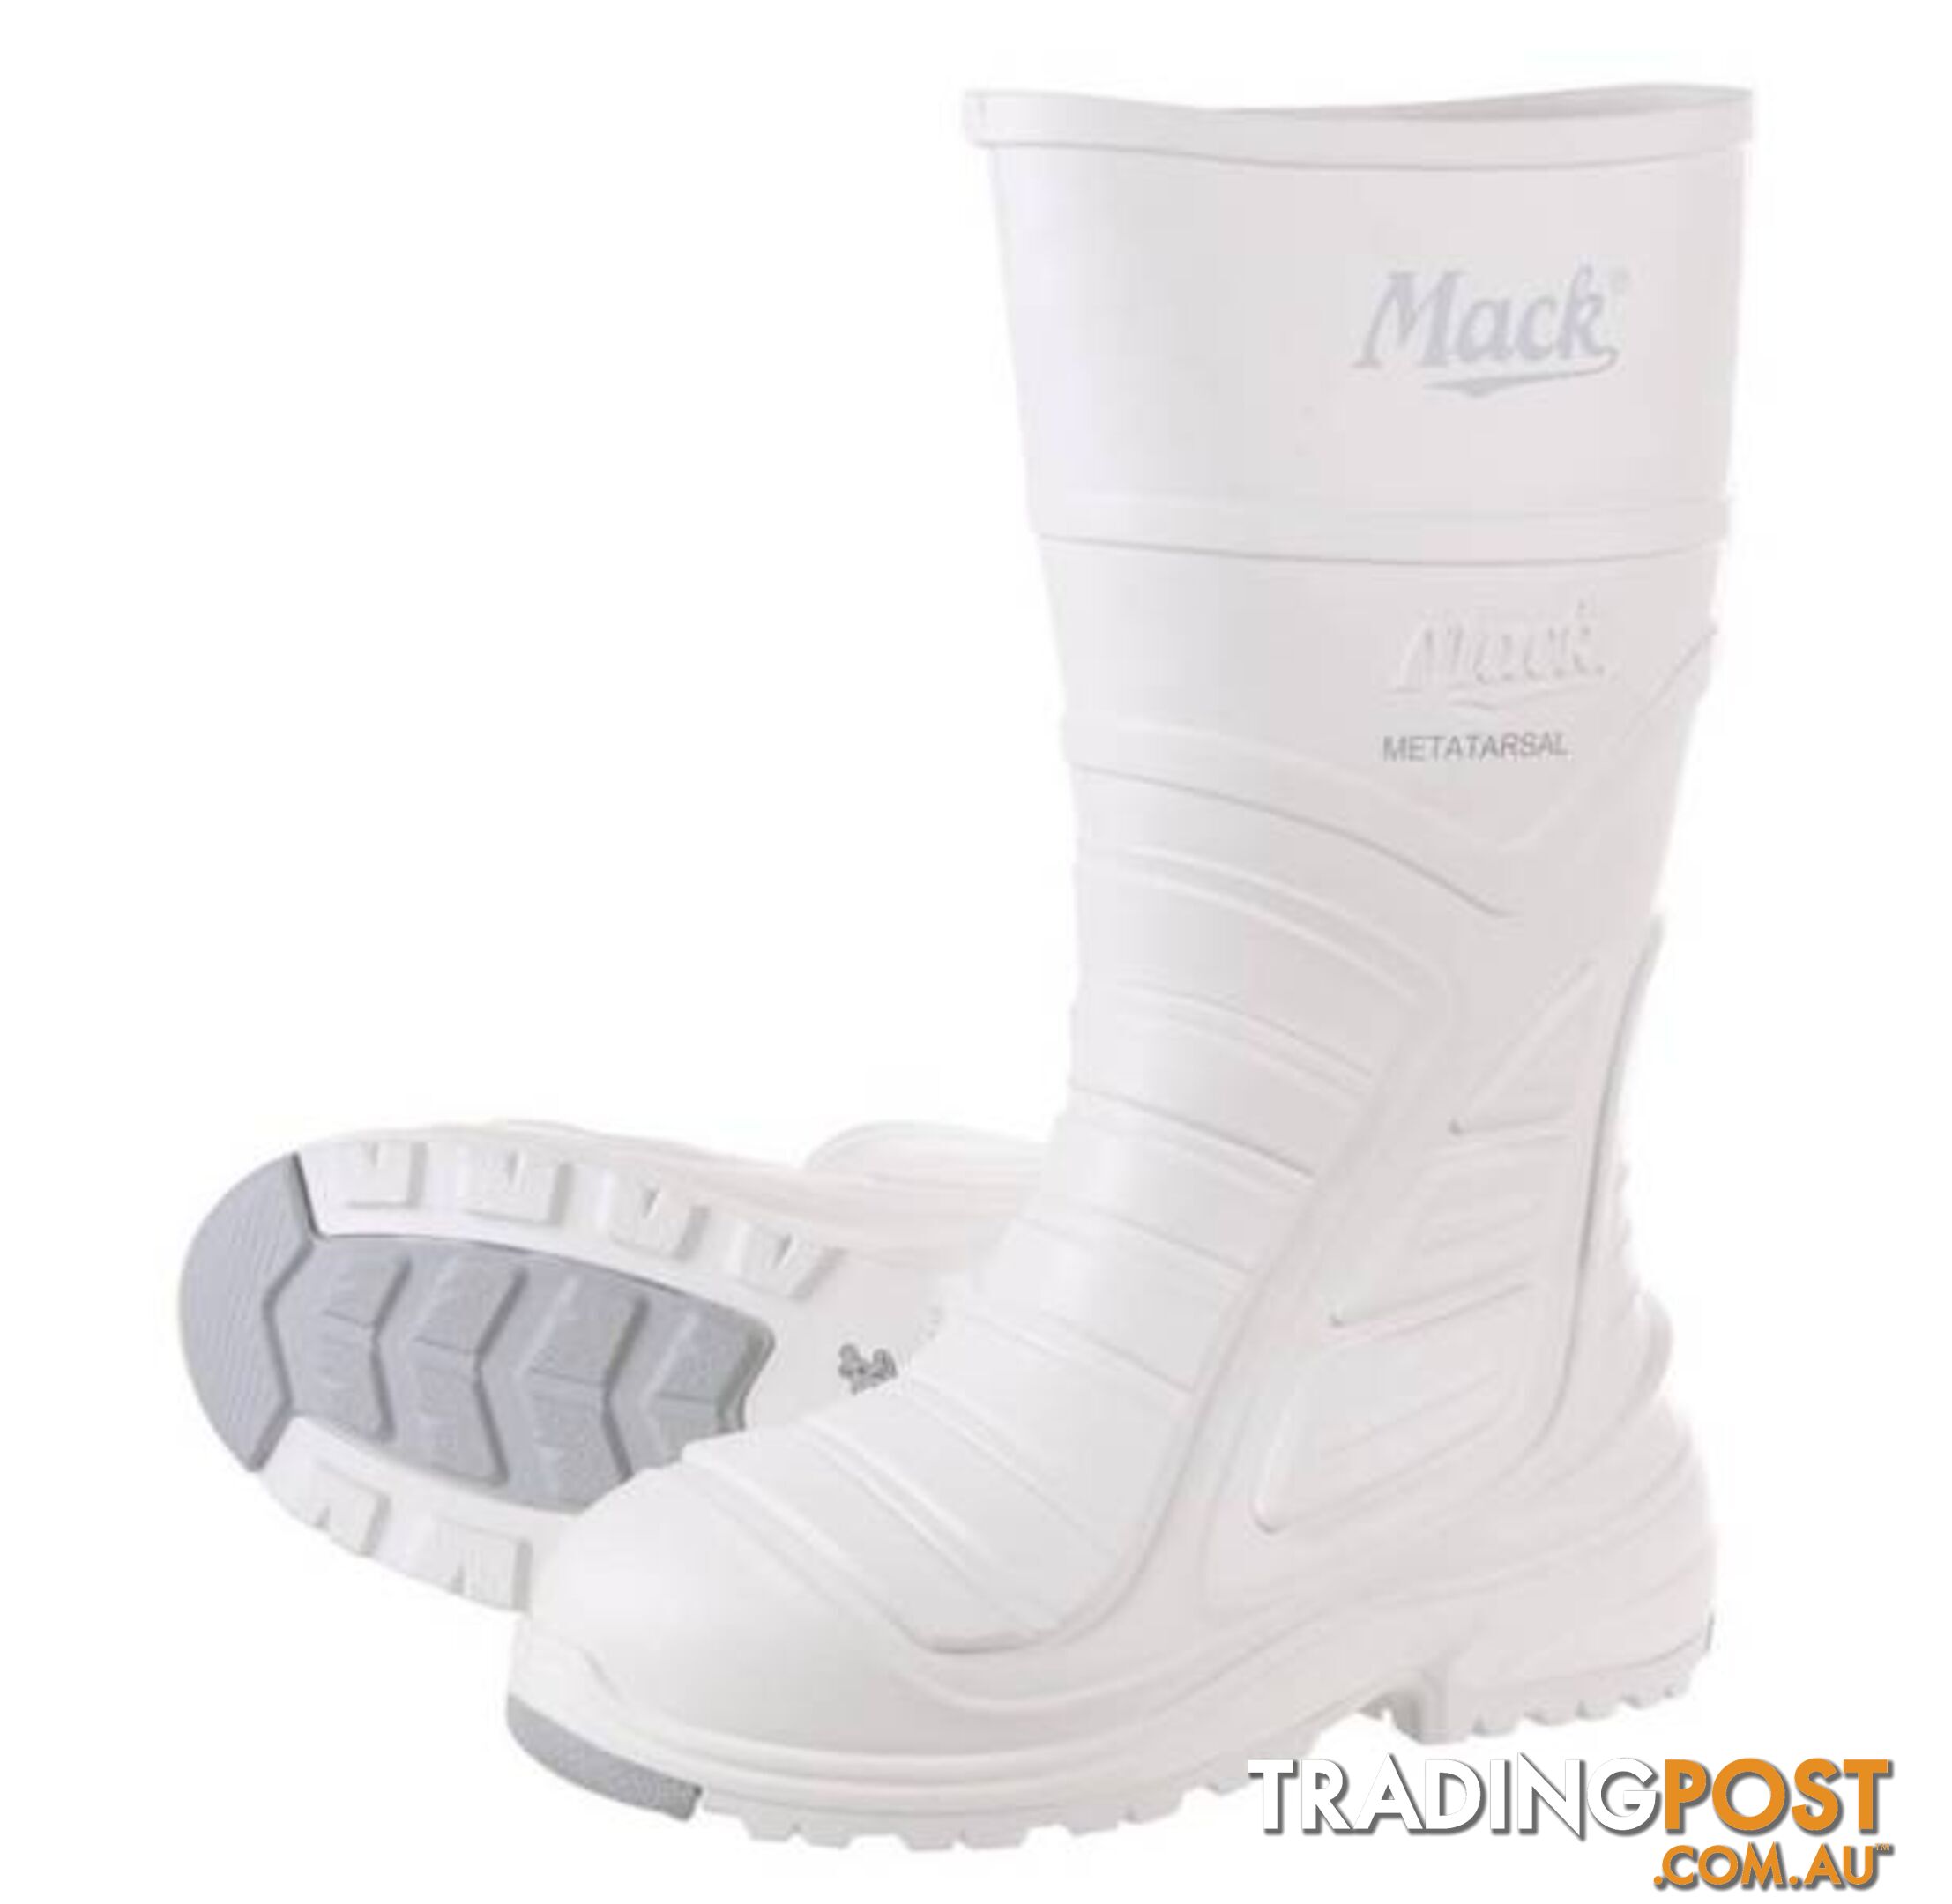 STEEL TOE GUMBOOTS, SAFETY HELMETS (new) From: $10